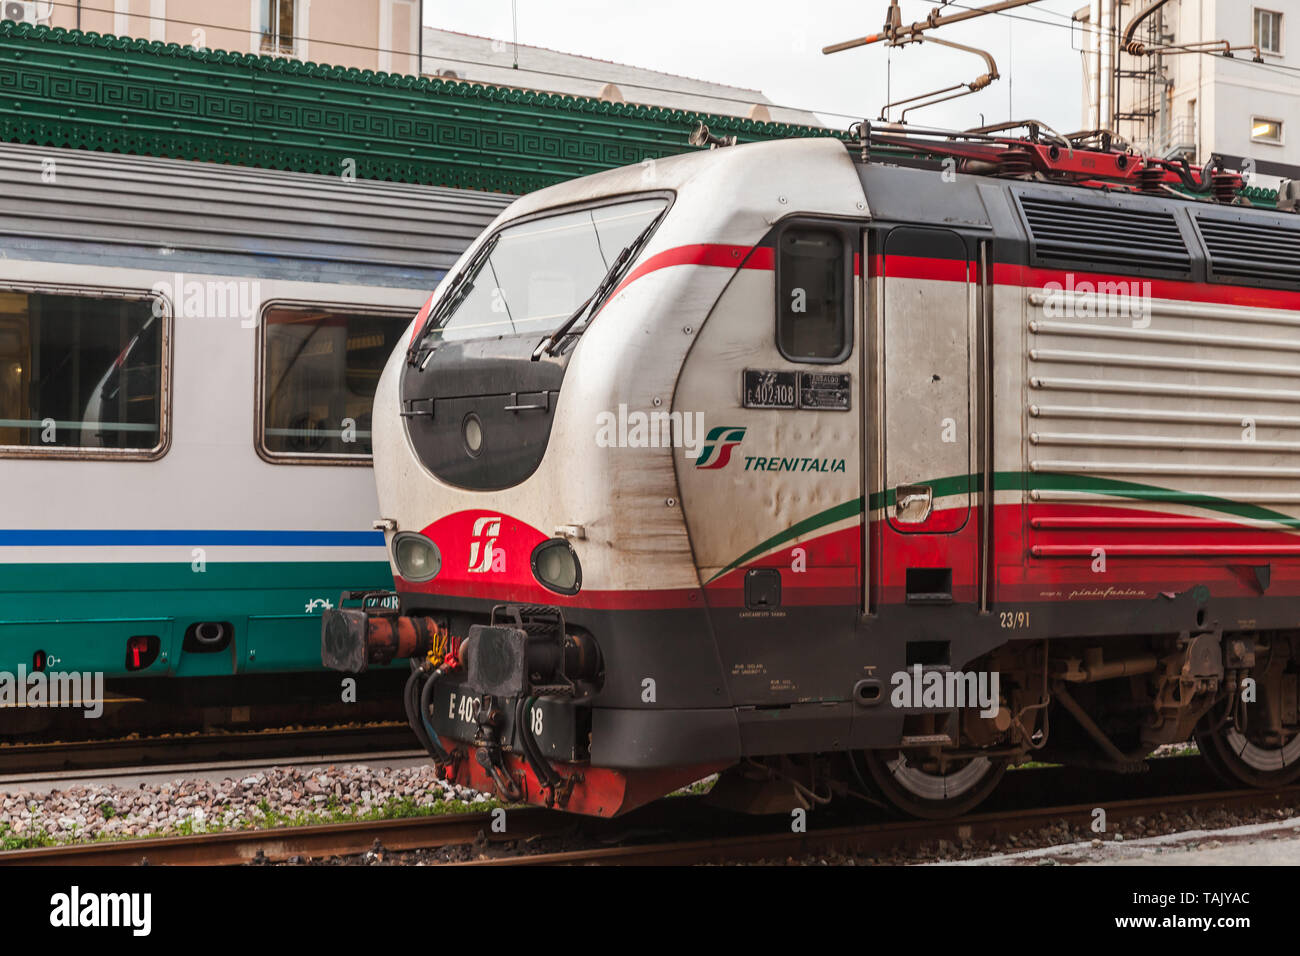 Genova, Italy - January 19, 2018: Locomotive operated by Trenitalia which is the primary train operator in Italy Stock Photo